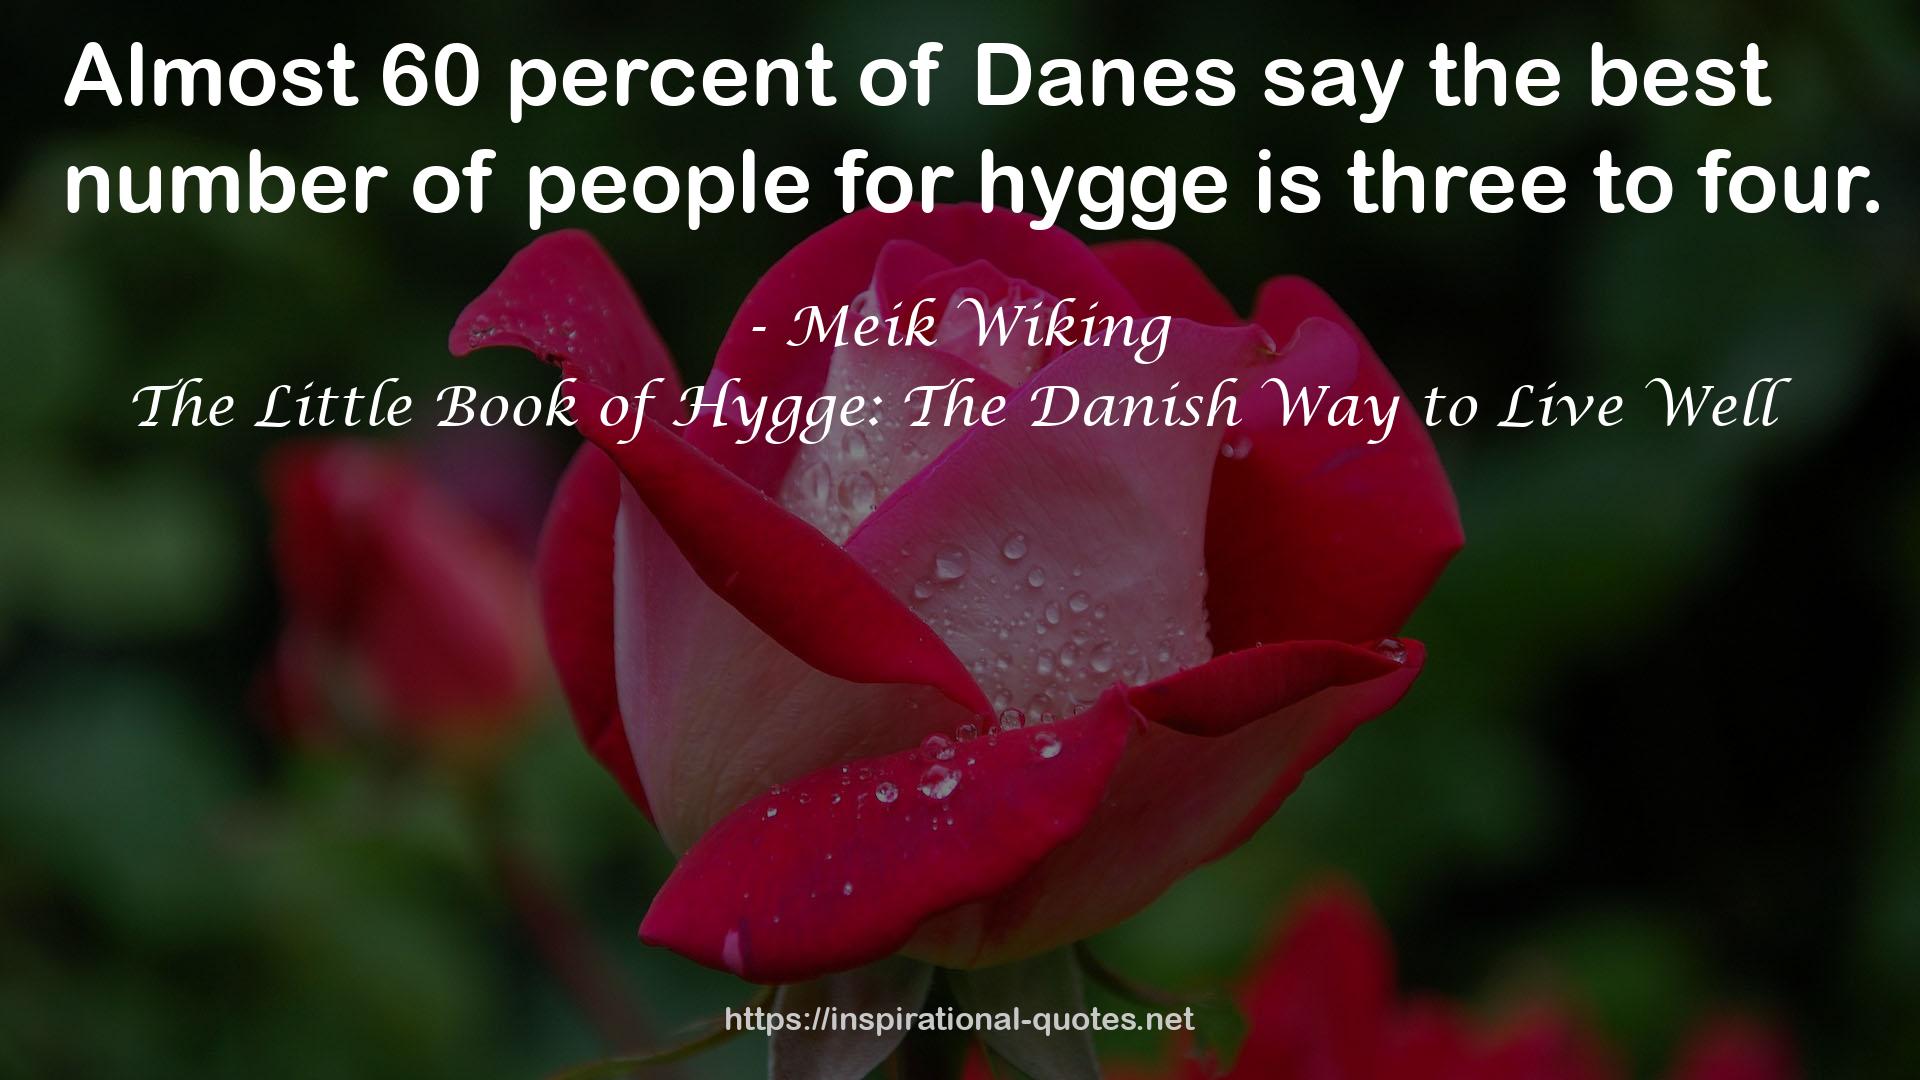 The Little Book of Hygge: The Danish Way to Live Well QUOTES